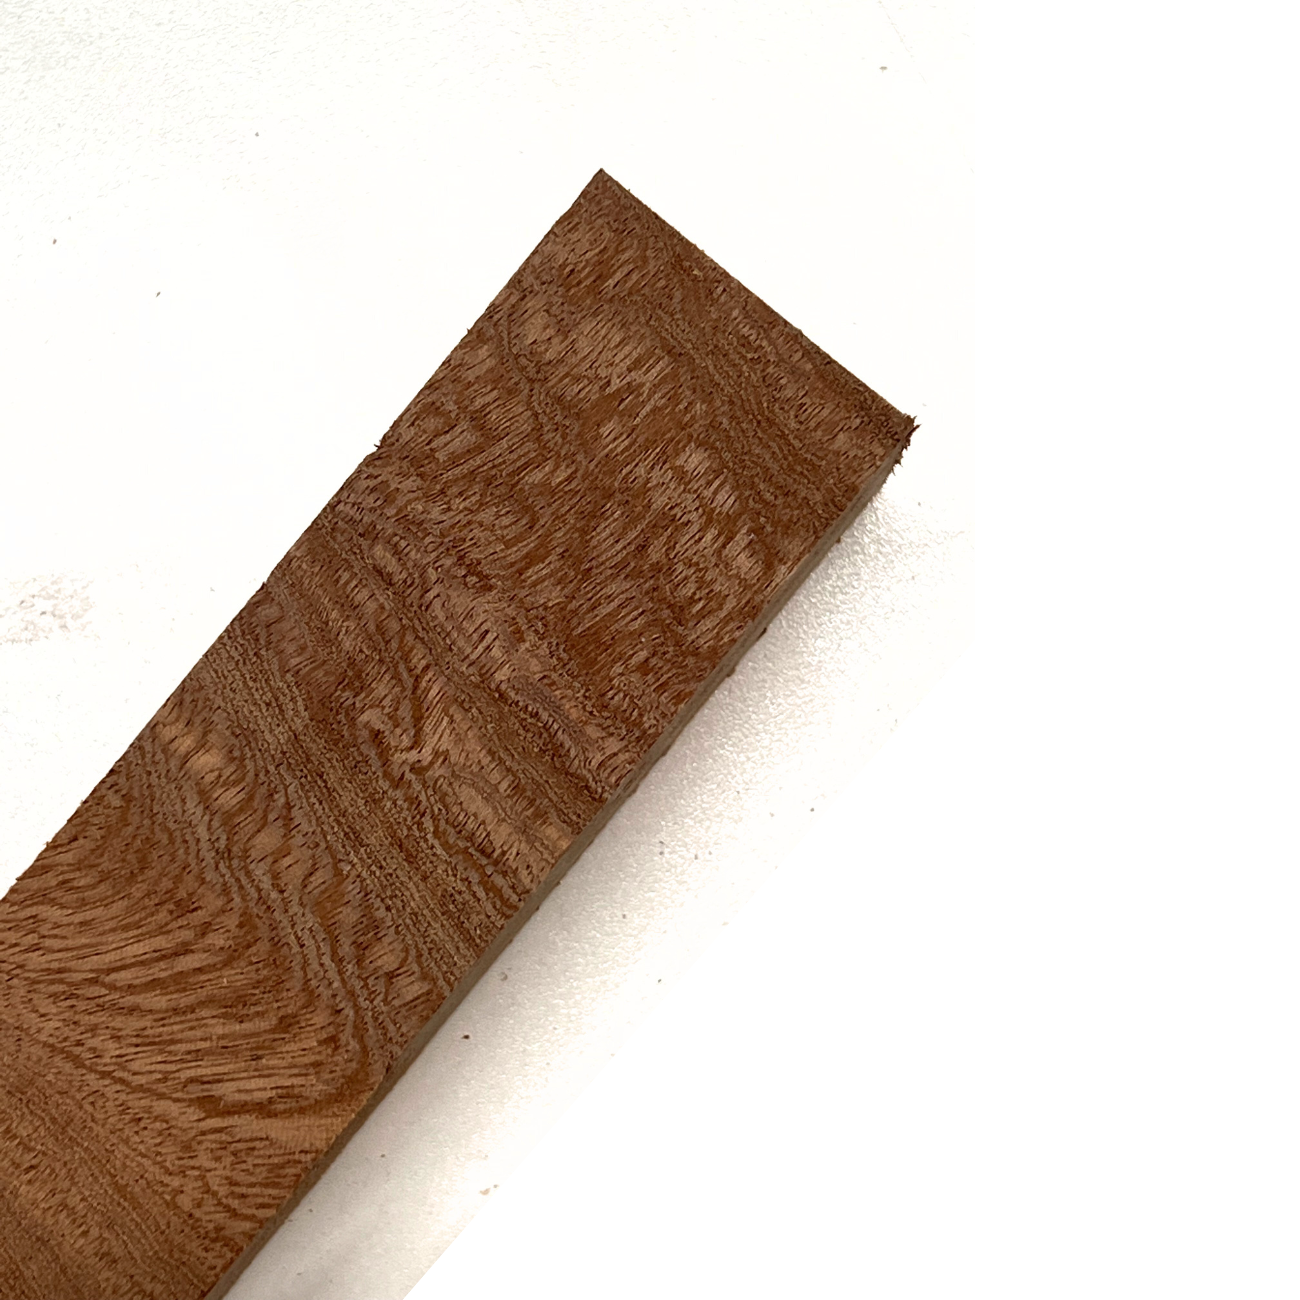 Quilted Curly Sapele Hobby Wood Blanks - Exotic Wood Zone - Buy online Across USA 